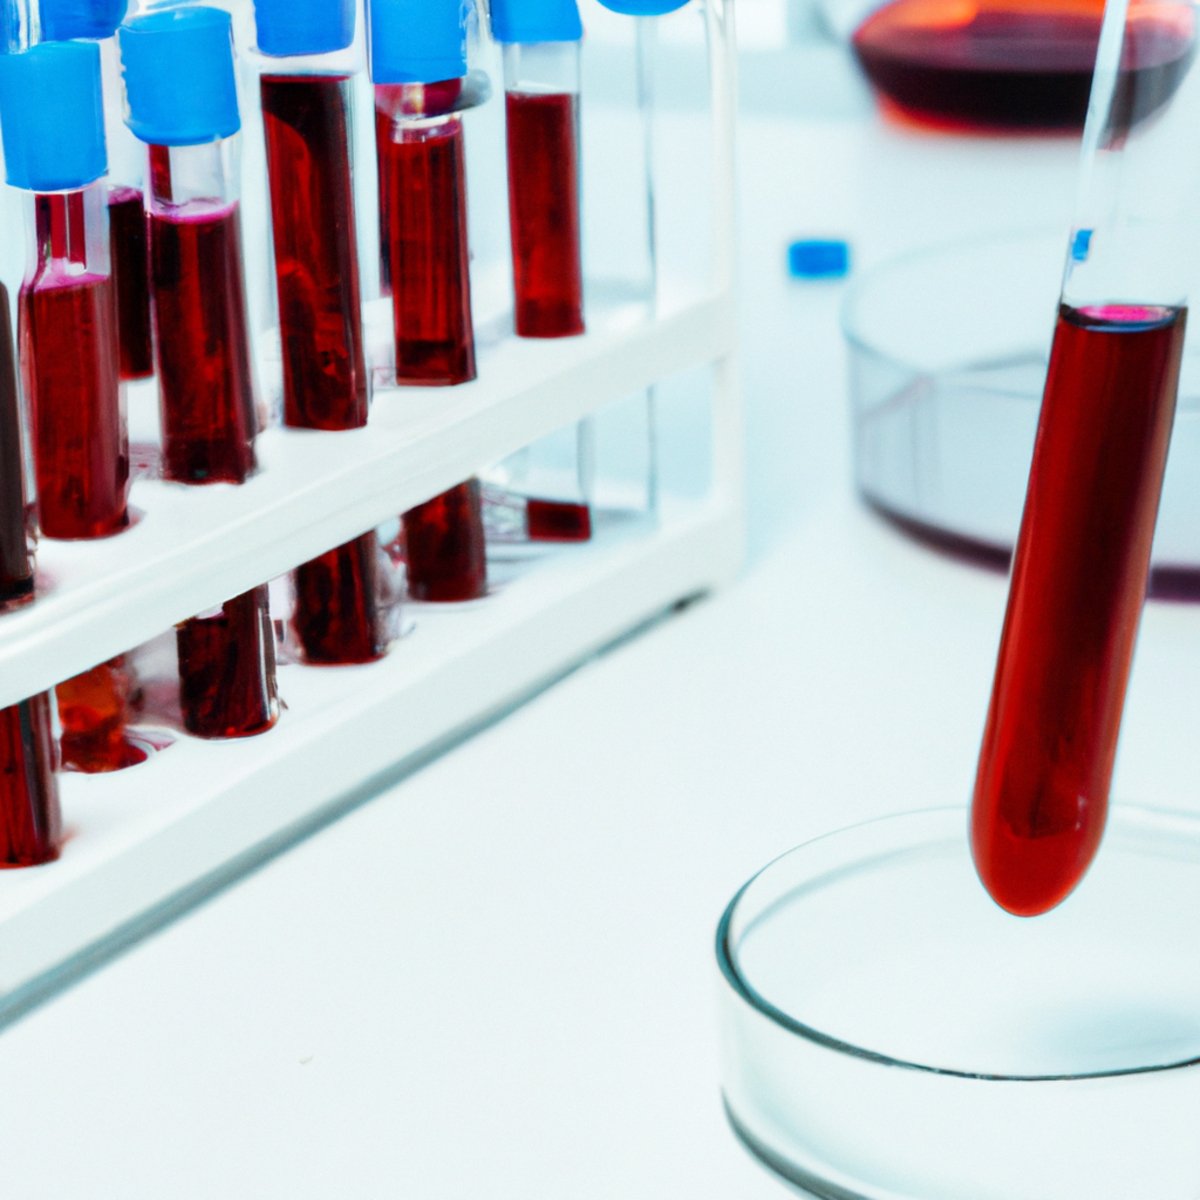 Close-up of red blood sample in test tube on lab bench, surrounded by scientific equipment, emphasizing its role in diagnosing medical conditions.